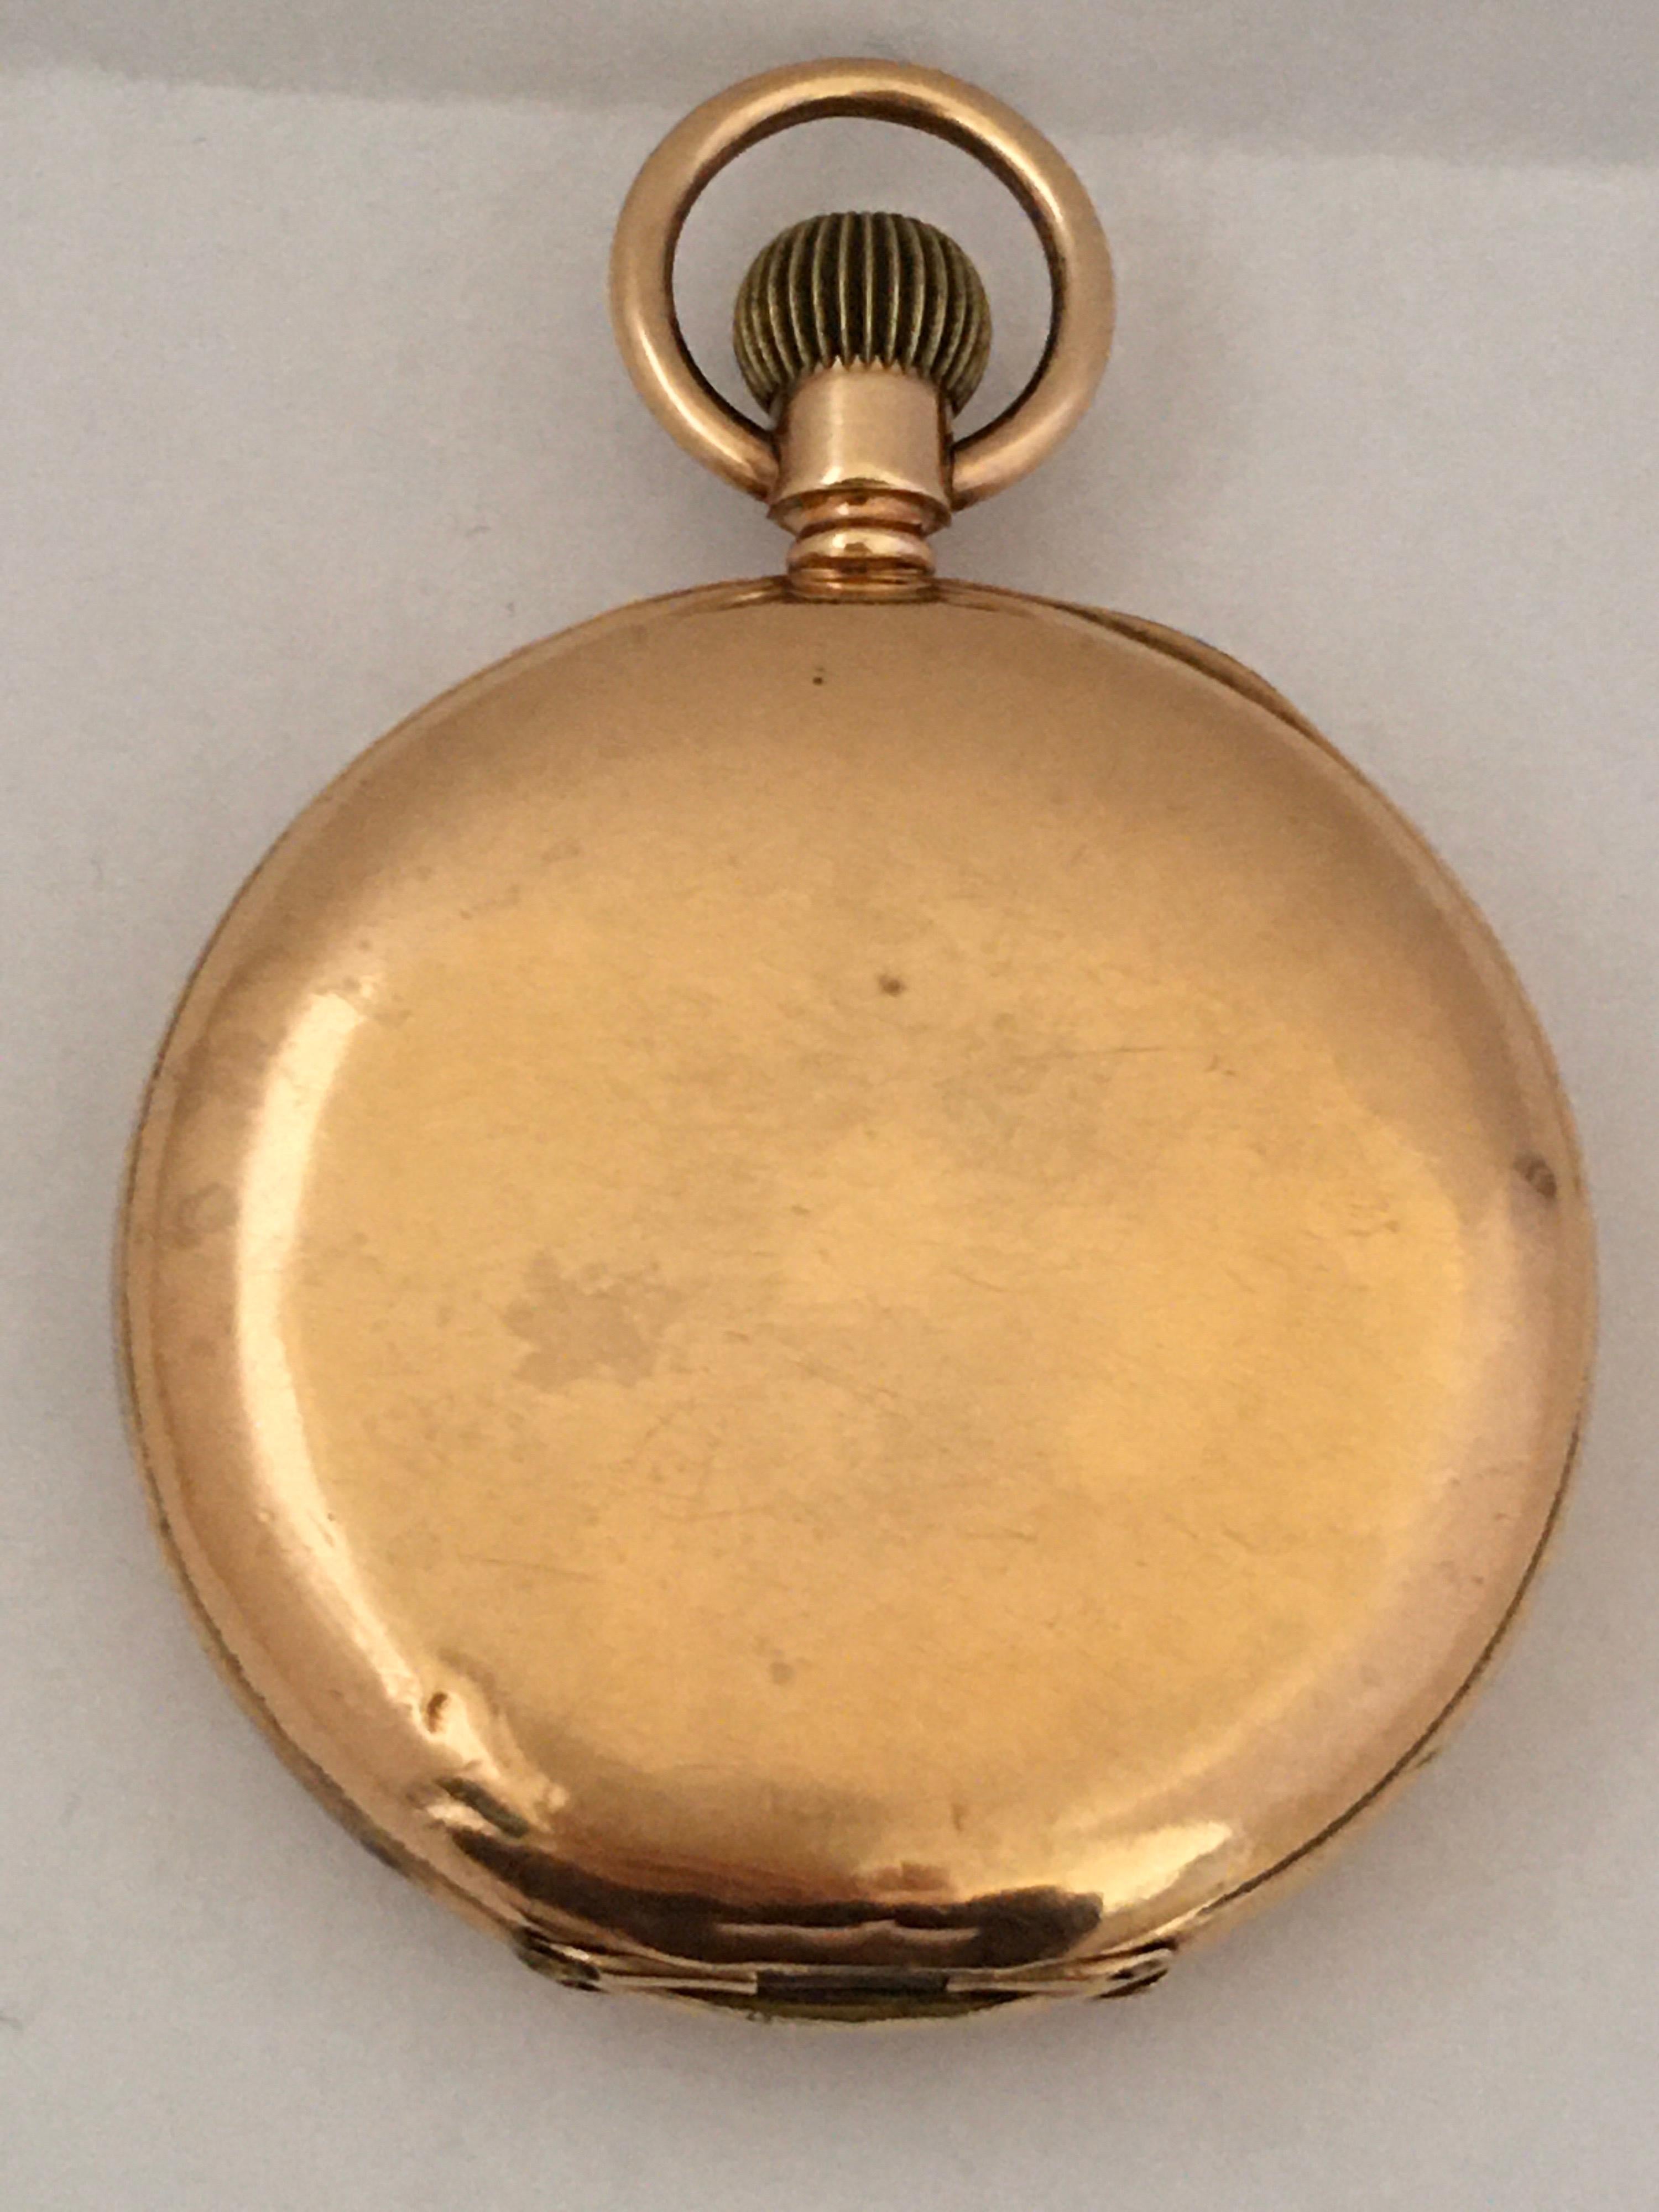 This beautiful antique full hunter pocket watch is in good working condition. It has been serviced and is running well. Visible signs of wearing on the case as shown(some gold plated came off).

Please study the images carefully carefully as form